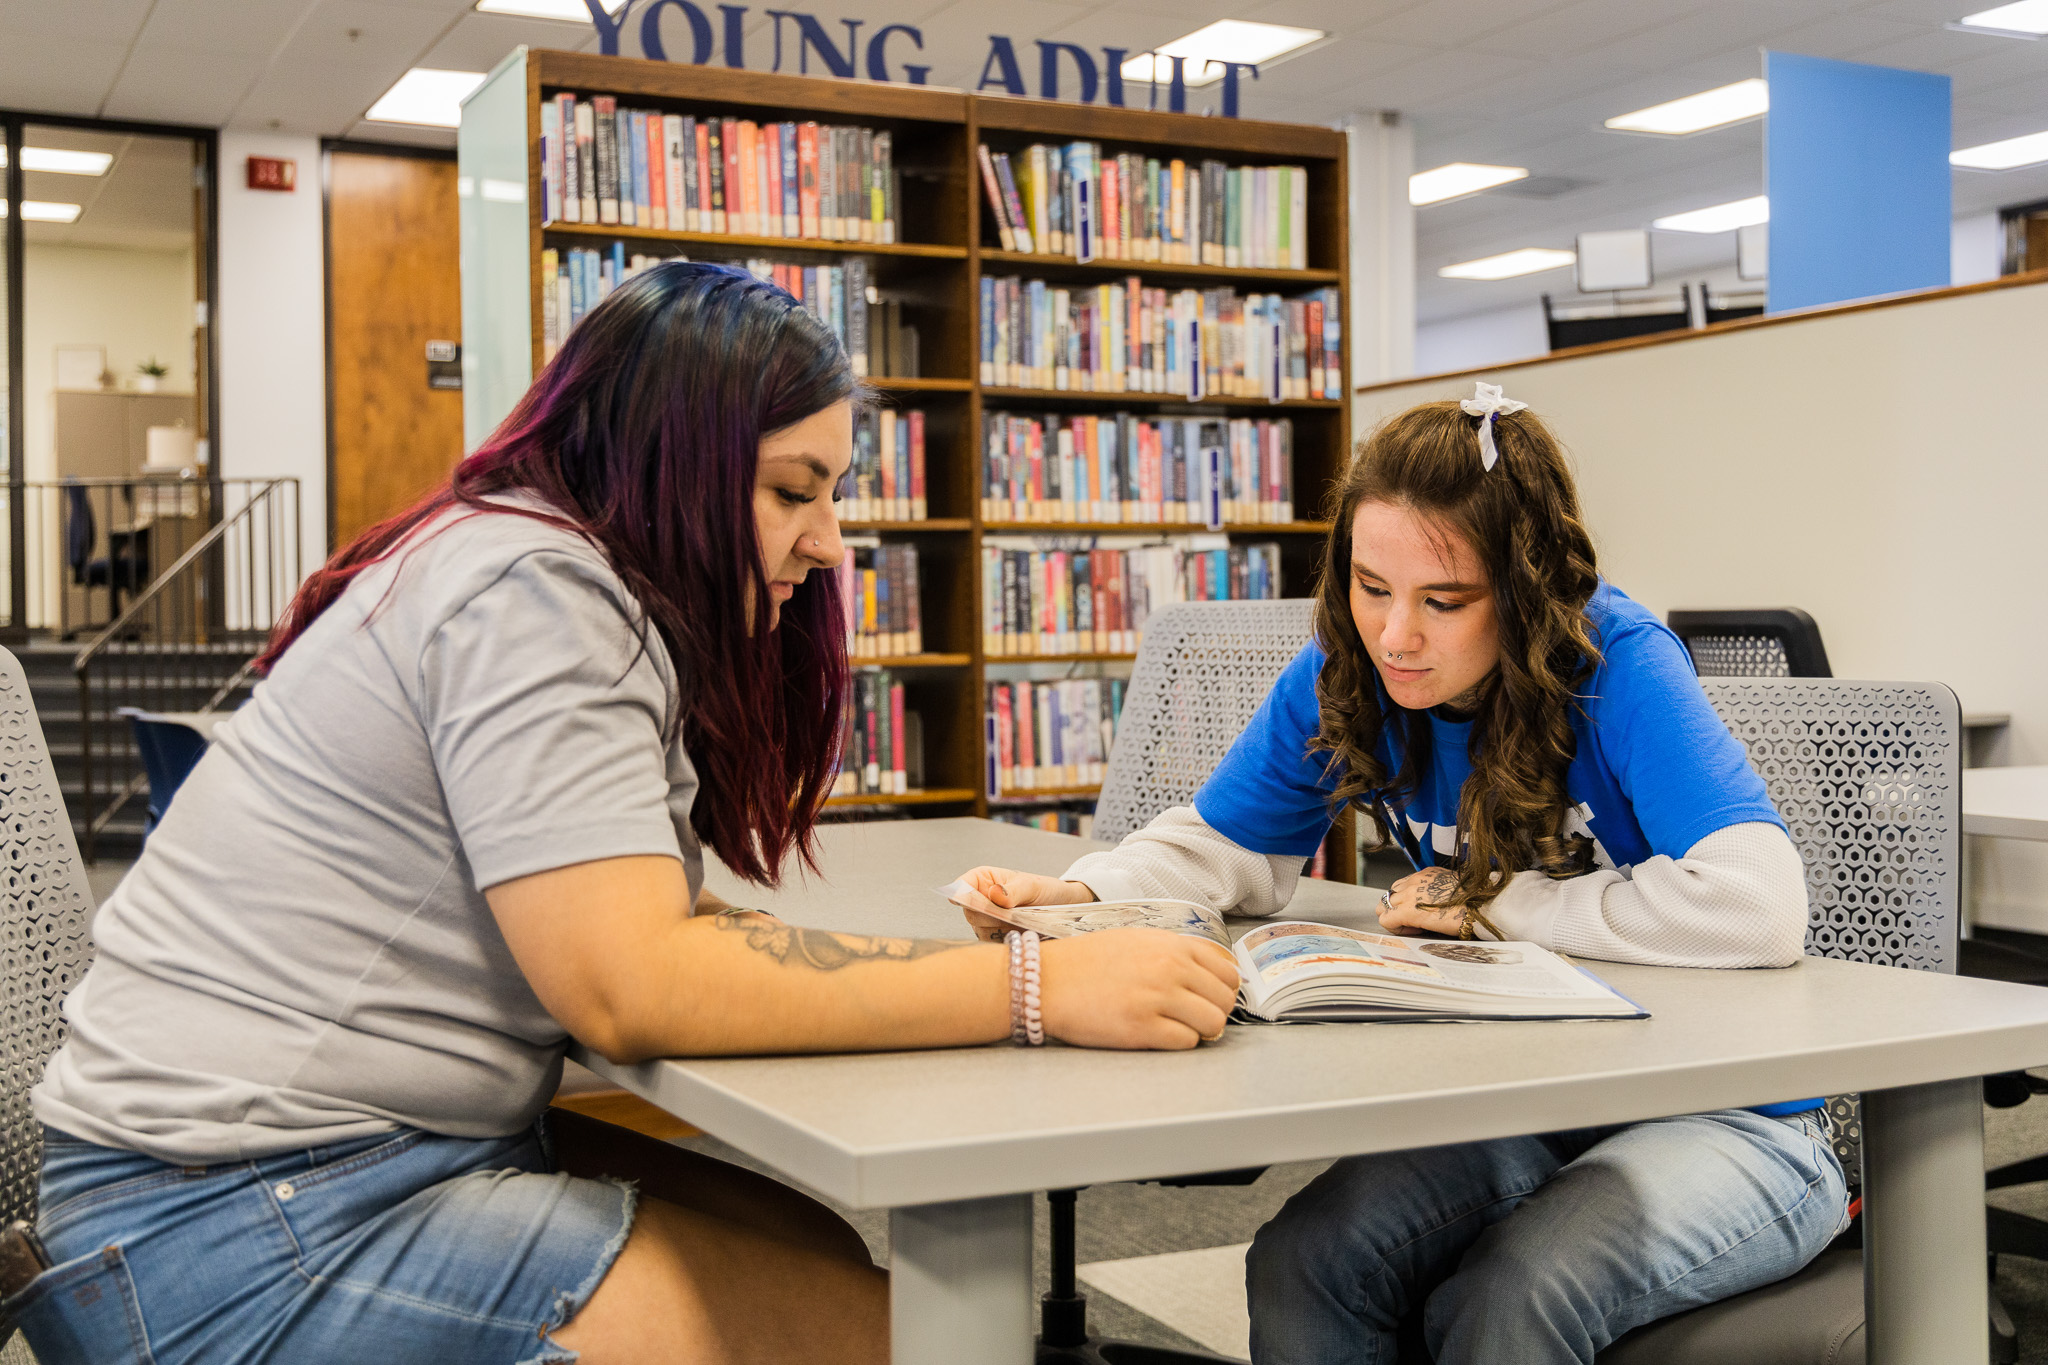 Two female students studying in the library at a table together.